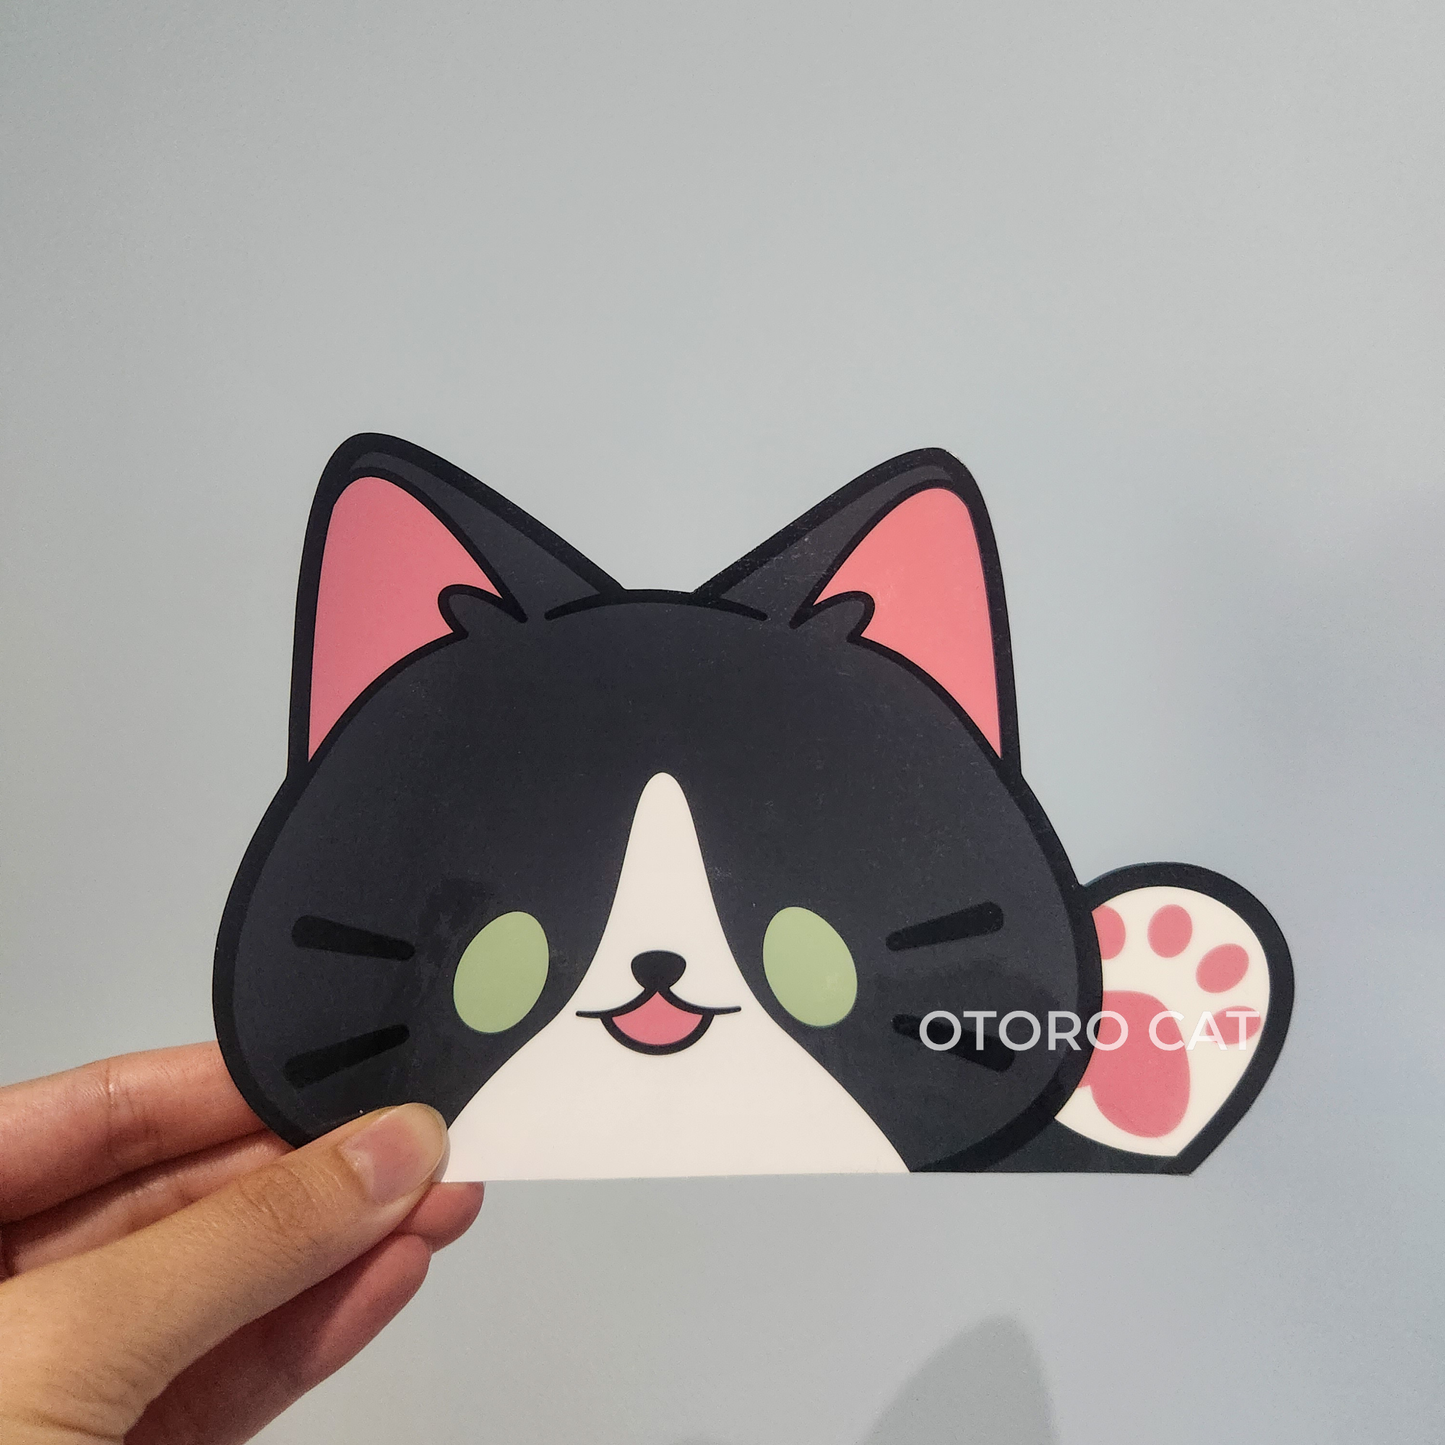 Tuxedo Cat Peeker Sticker: Adorable, Waterproof, and UV-Proof - Perfect for E-Readers and Cars!